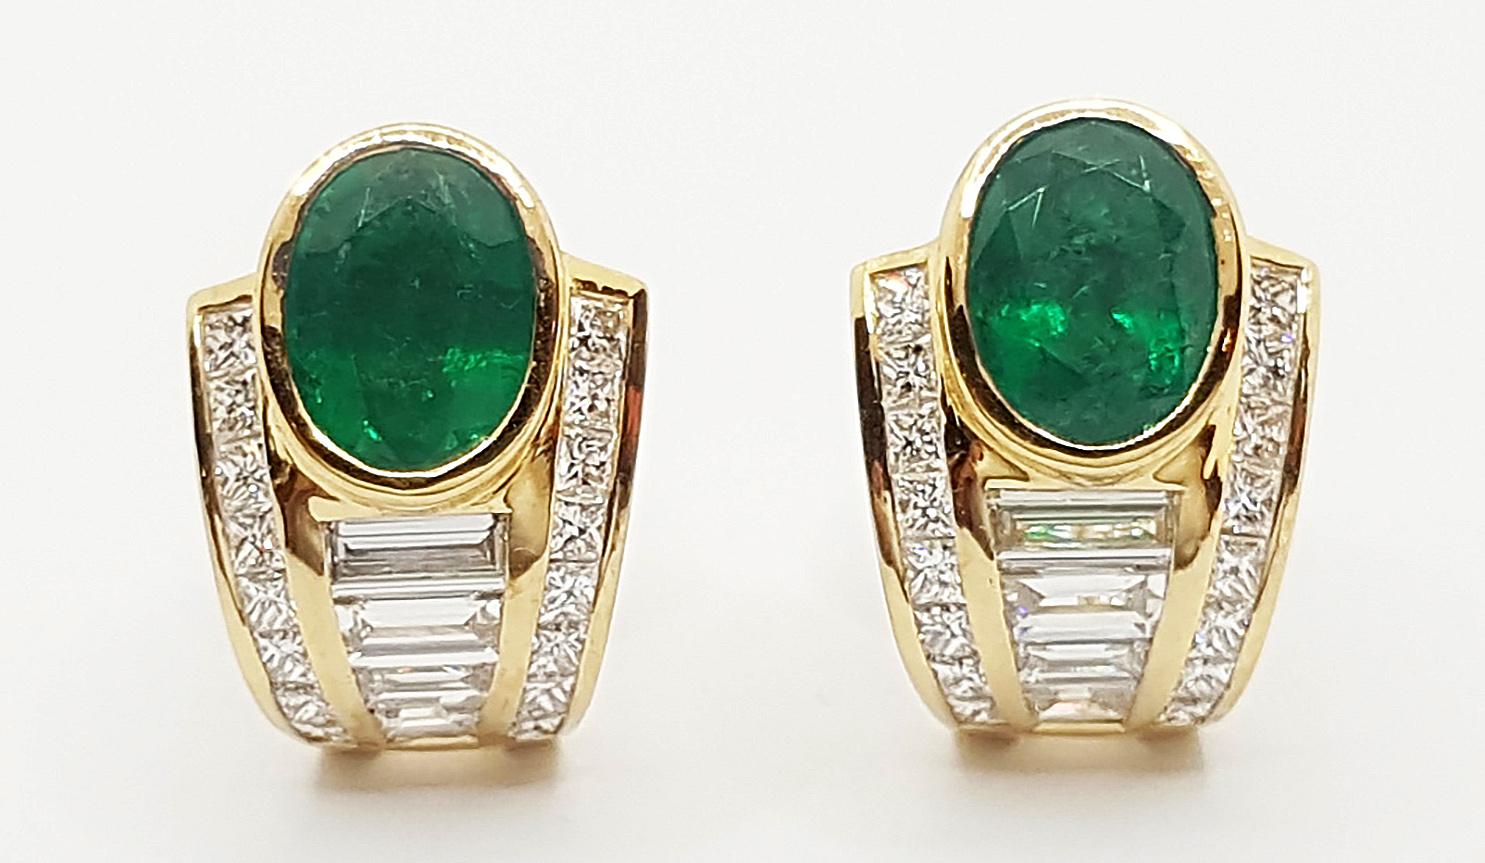 Emerald 5.93 carats and Diamond 2.99 carats Earrings set in 18K Gold Settings

Width: 1.4 cm 
Length: 2.1 cm
Total Weight: 16.78 grams

